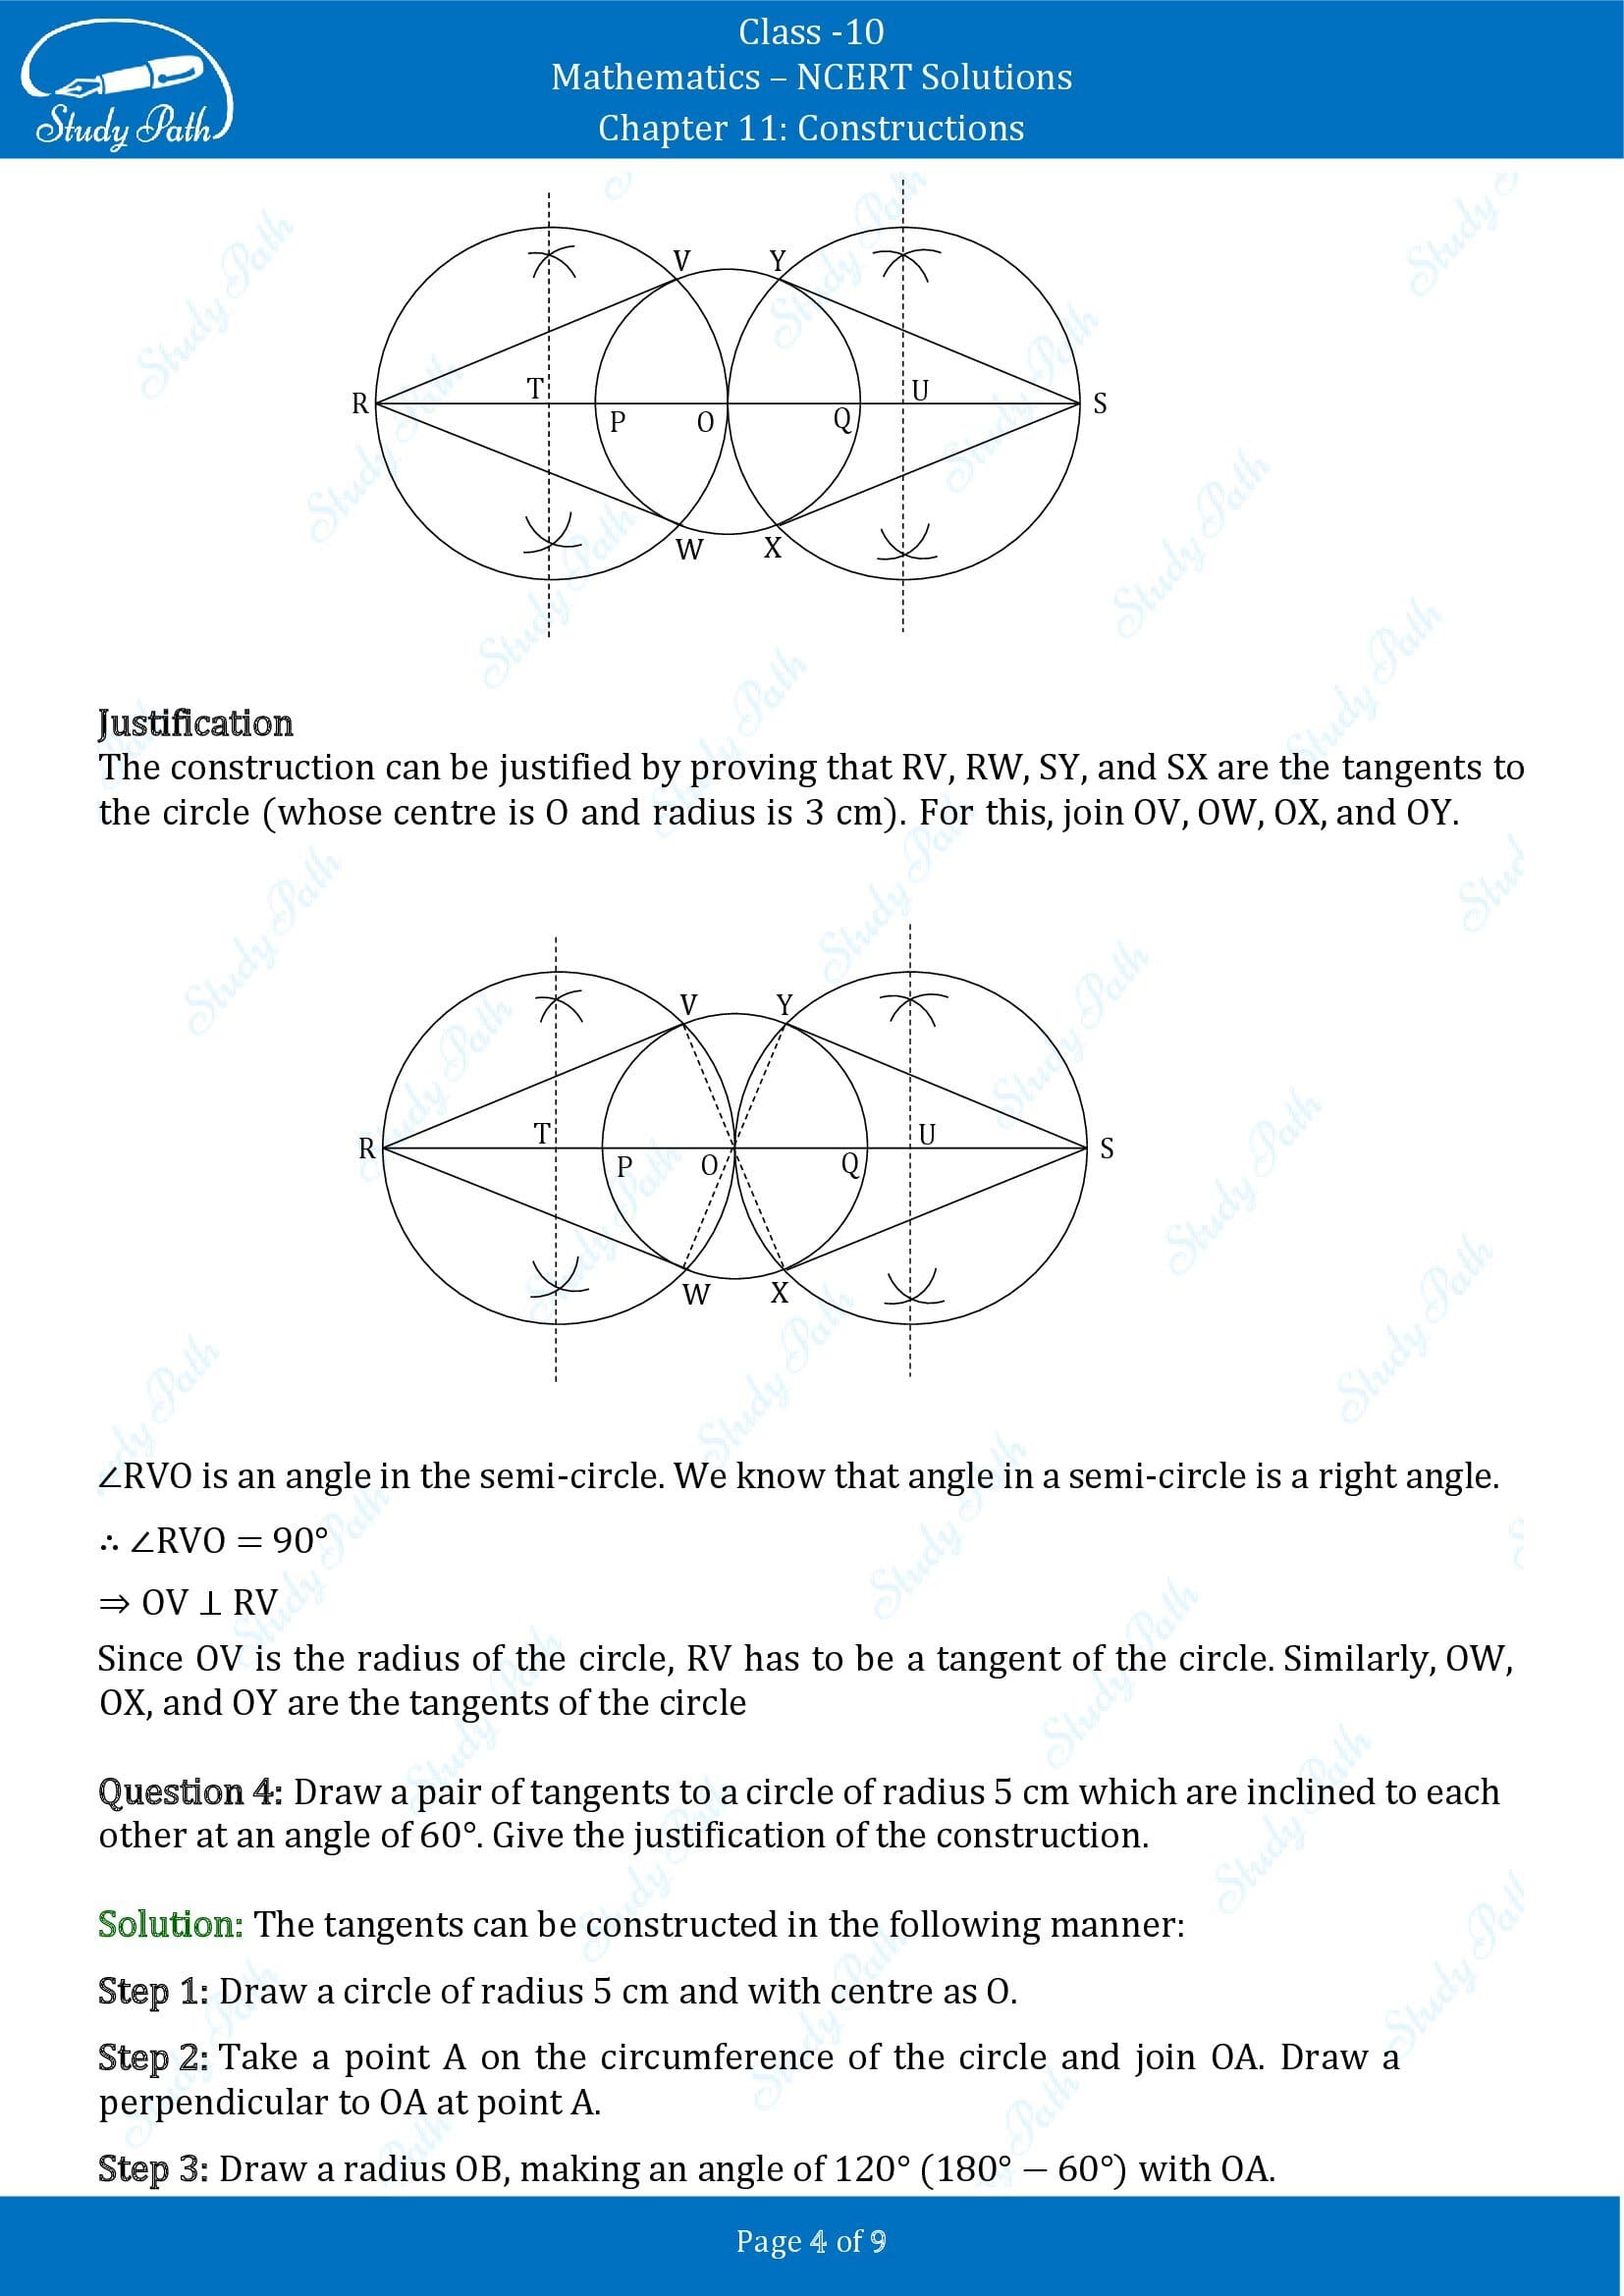 NCERT Solutions for Class 10 Maths Chapter 11 Constructions Exercise 11.2 00004